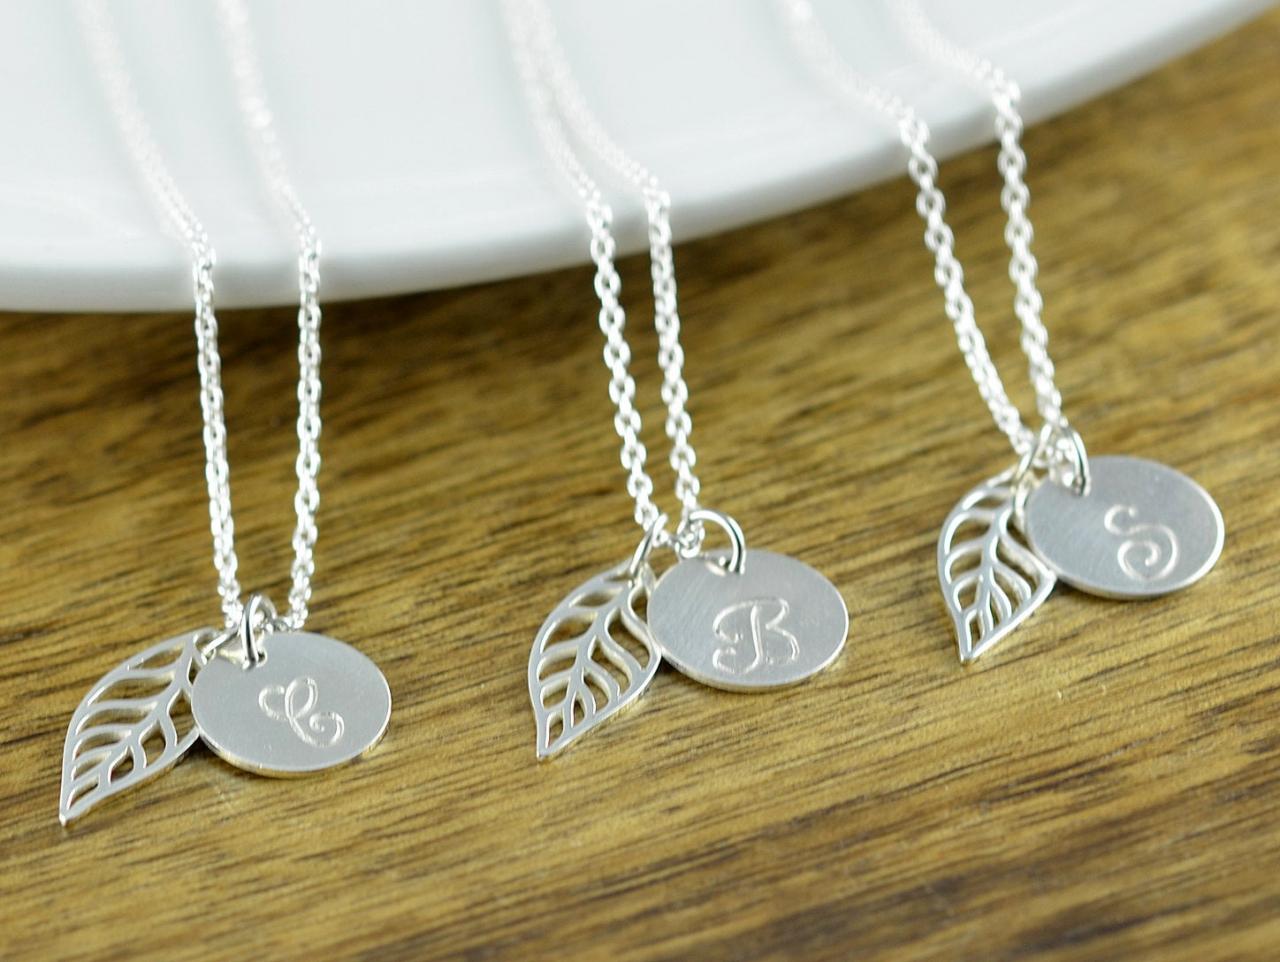 Silver Initial Necklace - Bridal Party Jewelry - Silver Leaf Necklace - Leaf Necklace Silver - Wedding Necklace Bridal Jewelry